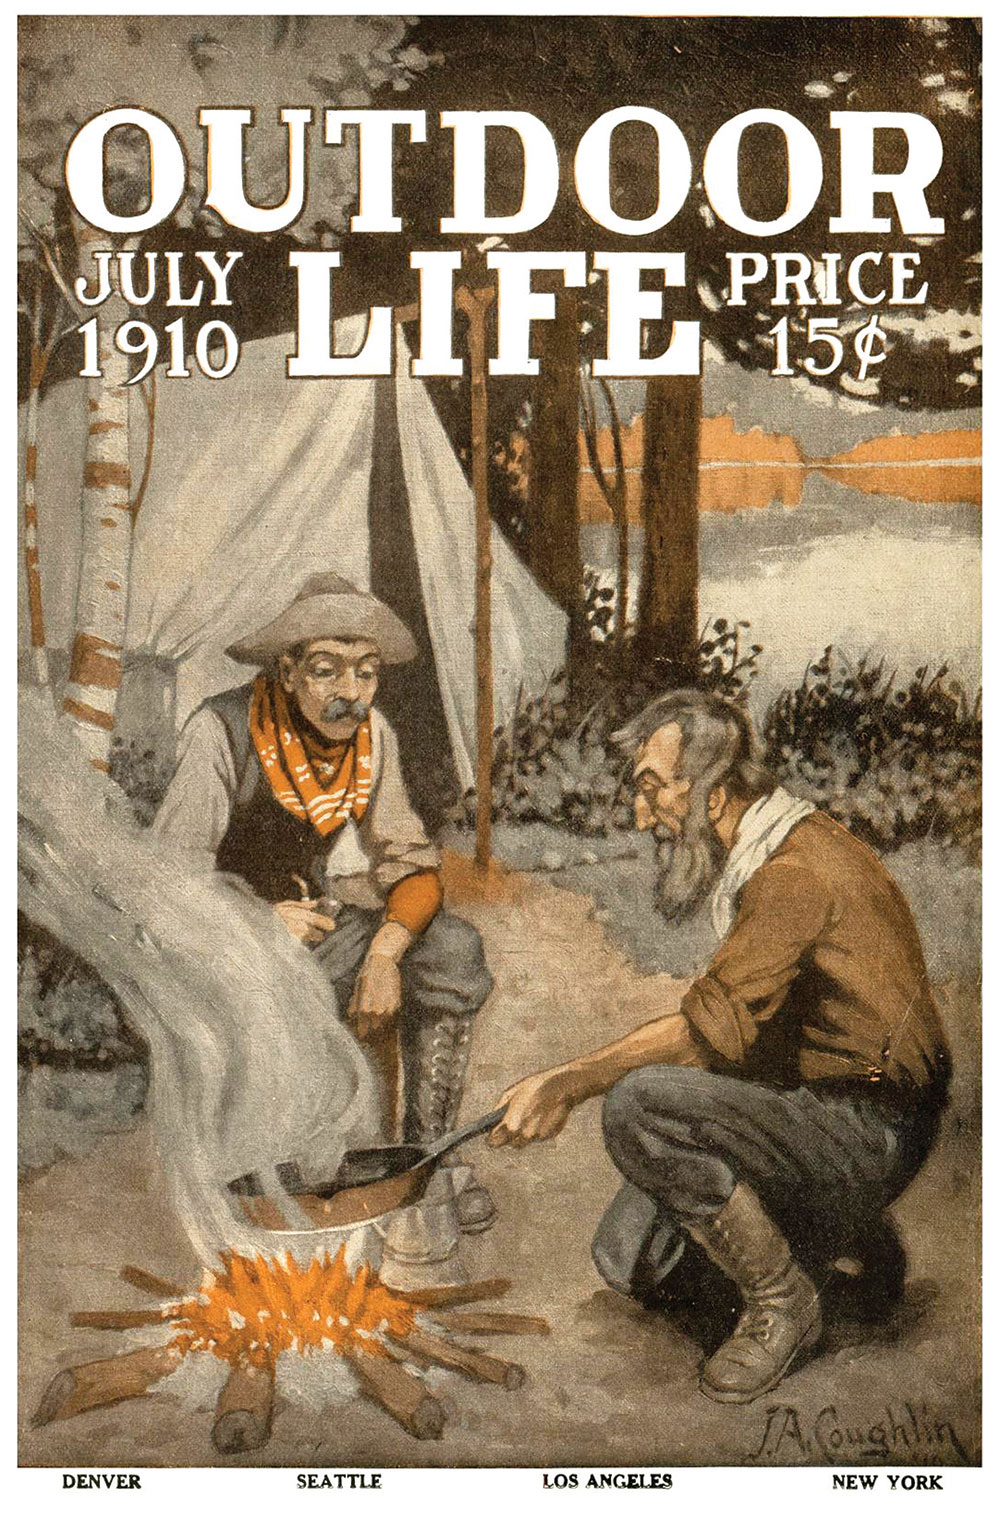 July 1910 cover of Outdoor Life